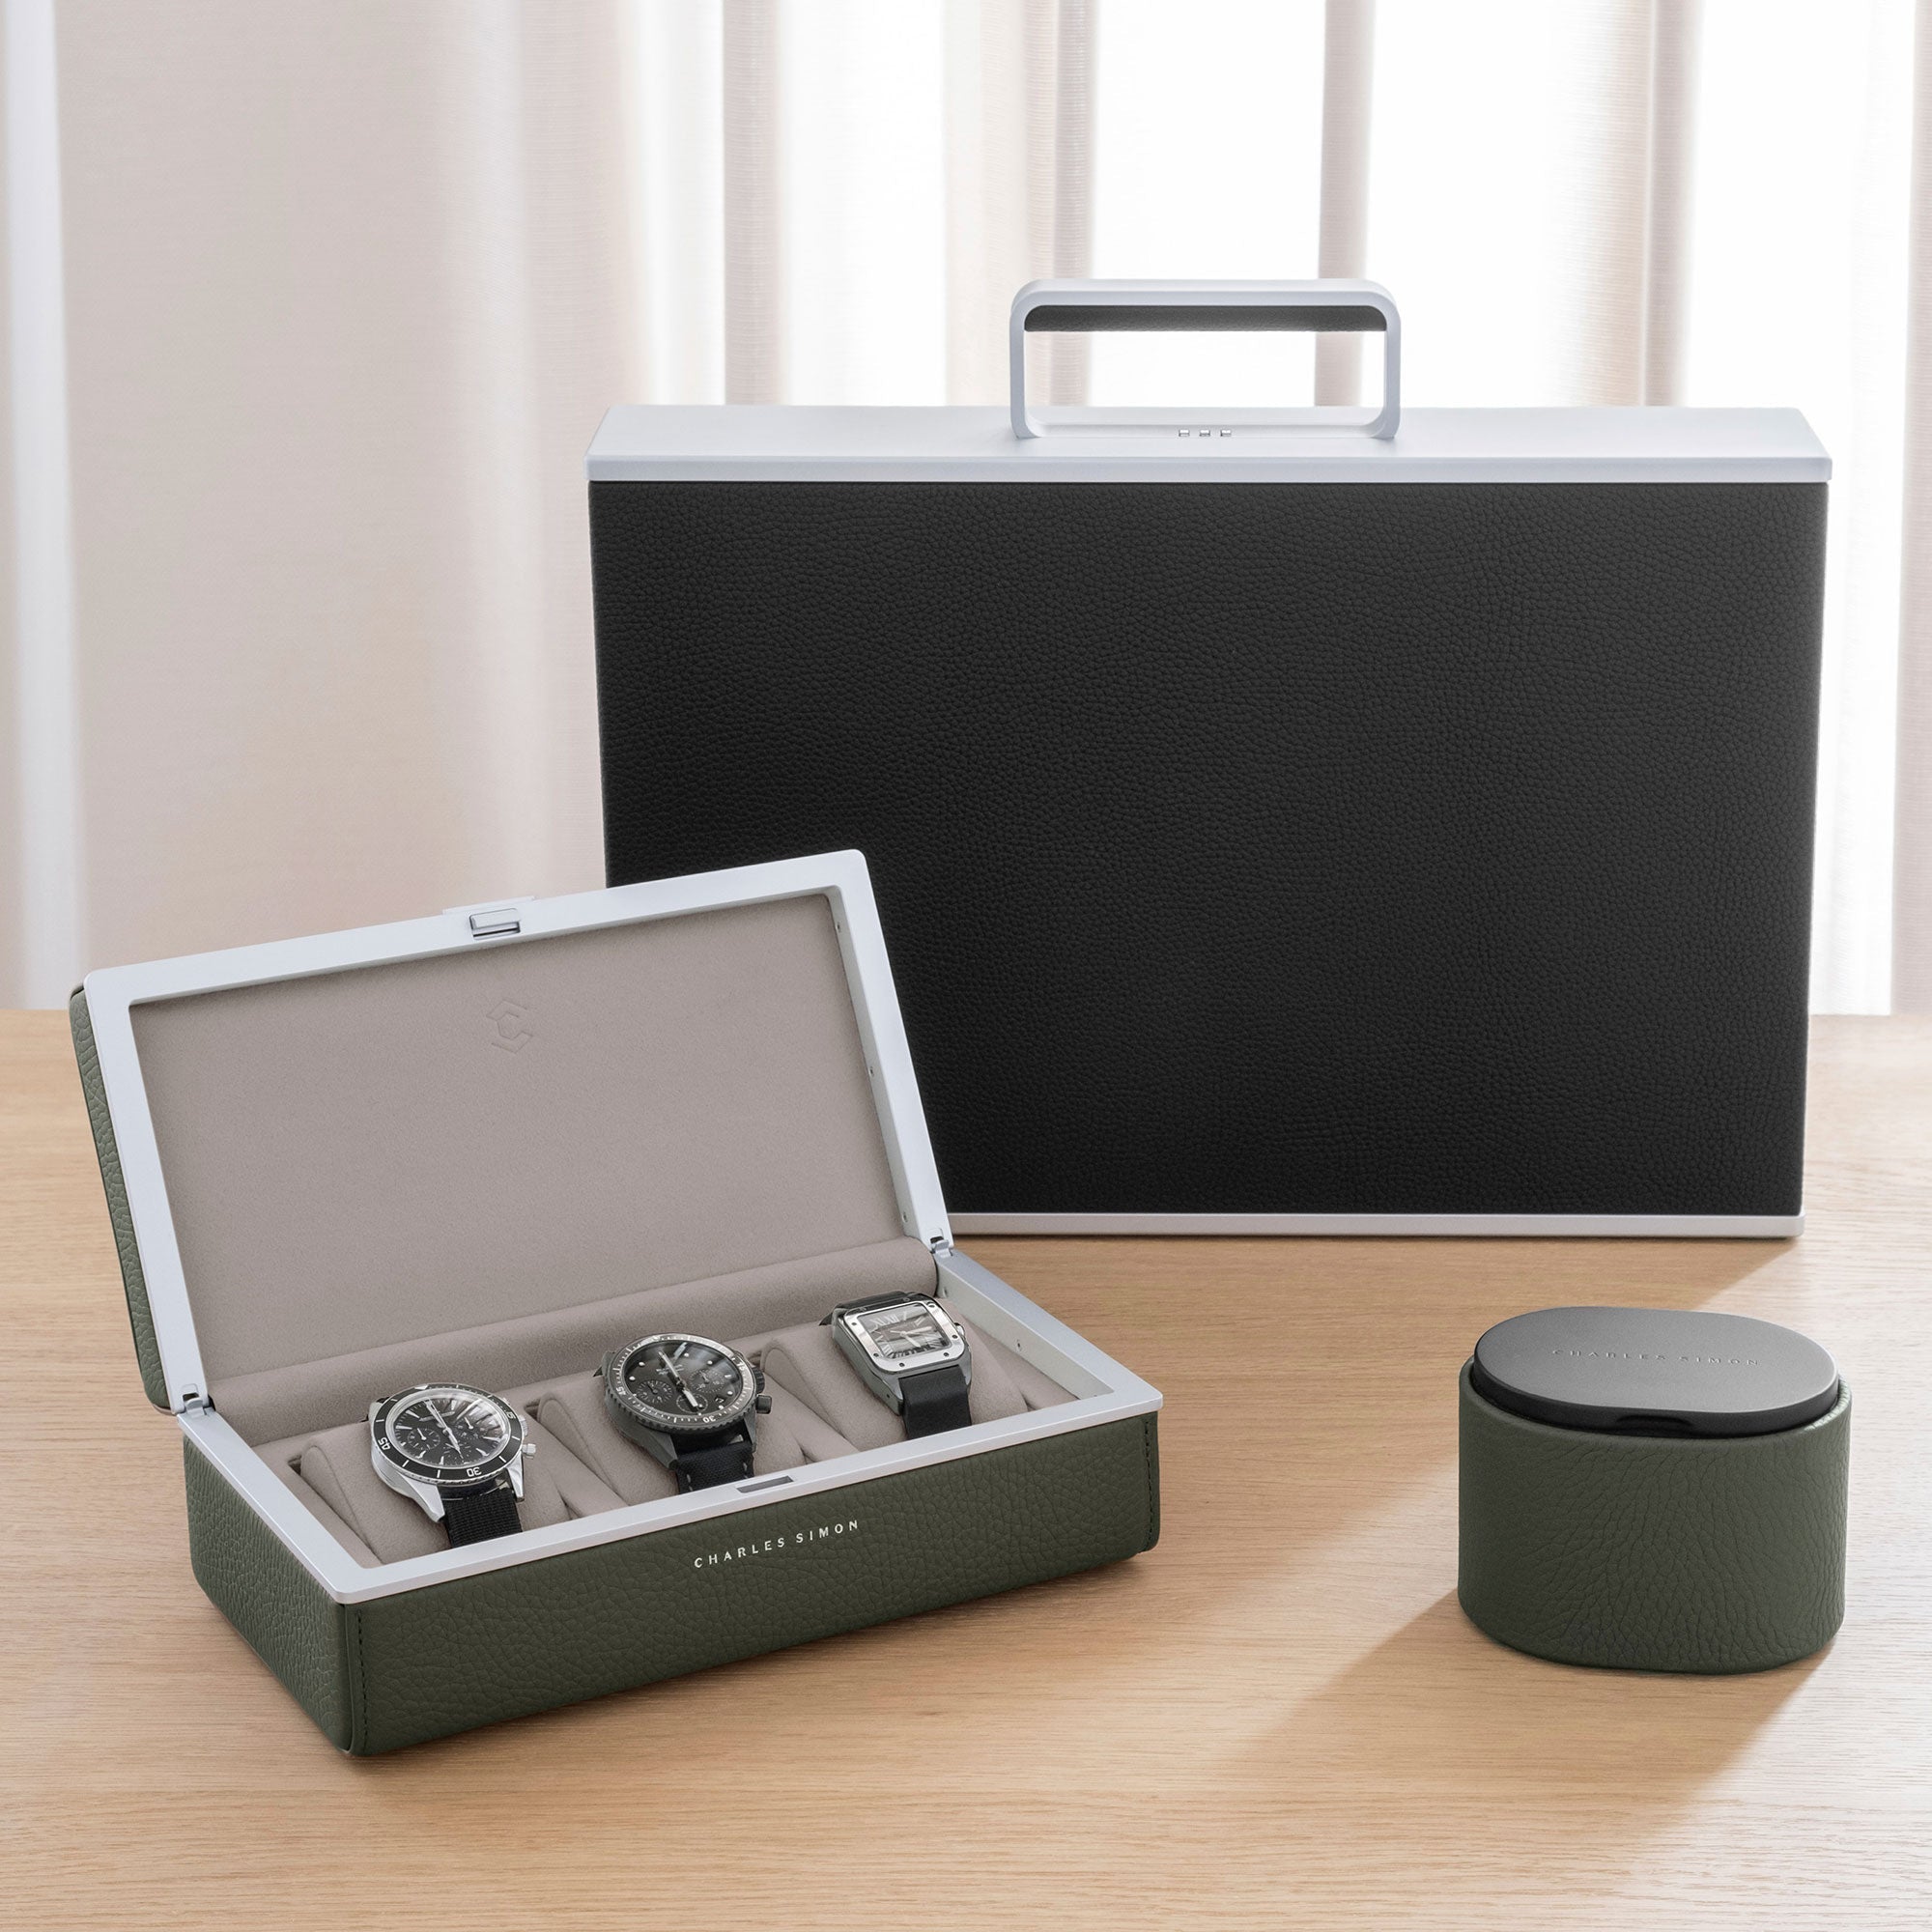 Charles Simon watch accessories collection in khaki leather. An open Eaton 3 watch case with 3 luxury watches inside is open on the left, a closed Theo is placed on the right and a Mackenzie watch briefcase is placed in the center in the back. 